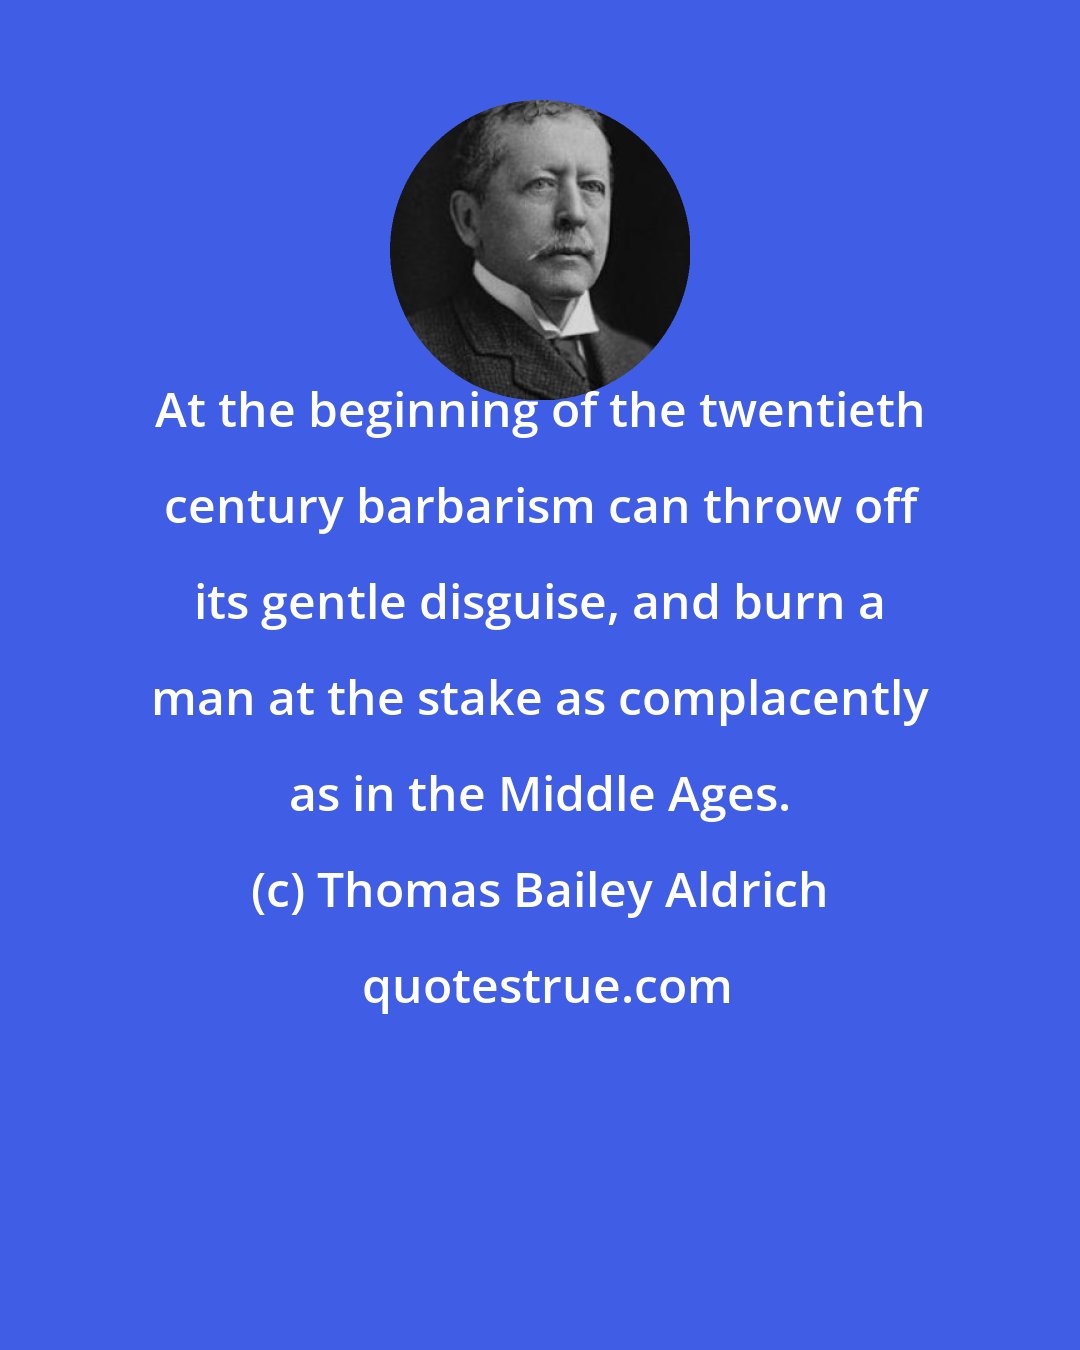 Thomas Bailey Aldrich: At the beginning of the twentieth century barbarism can throw off its gentle disguise, and burn a man at the stake as complacently as in the Middle Ages.